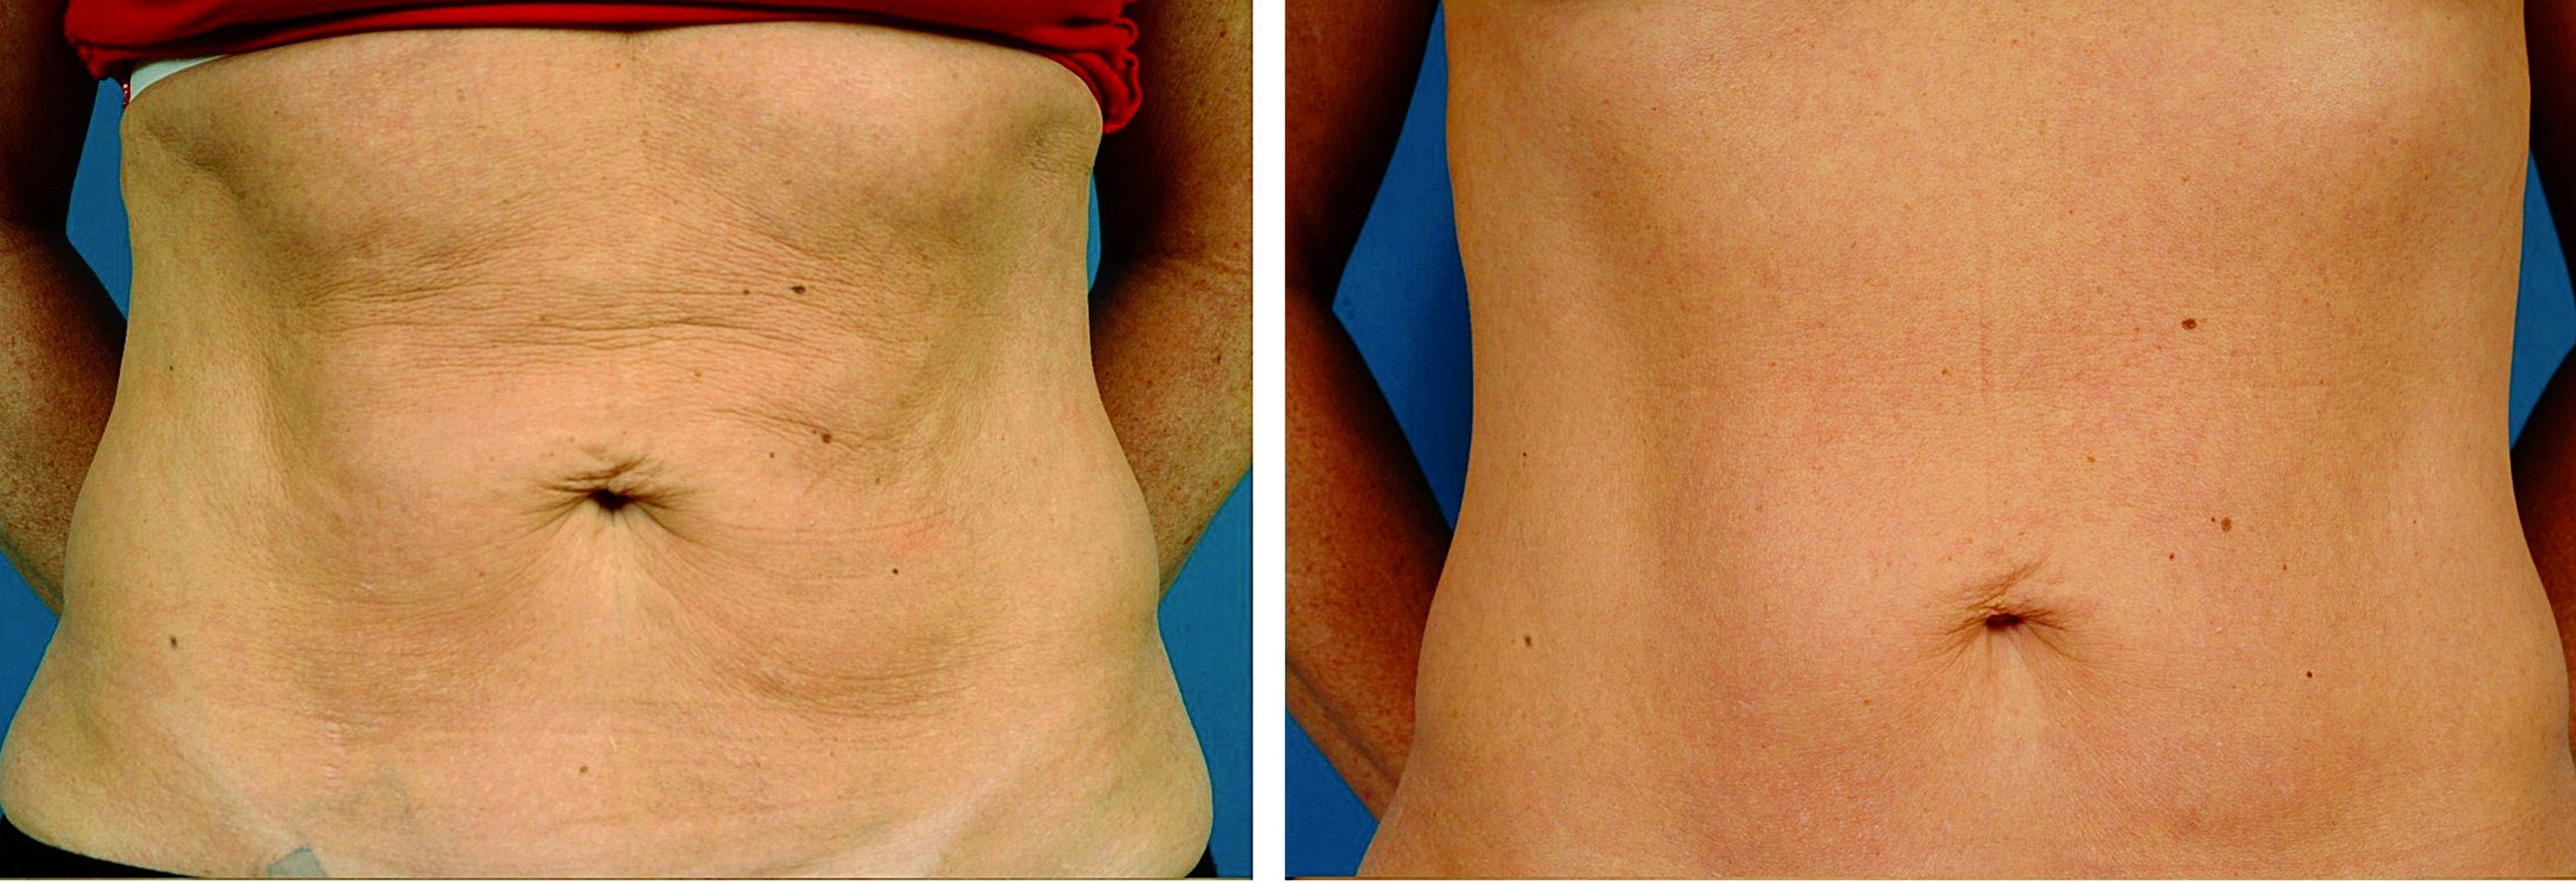 Thermage skin tightening to belly